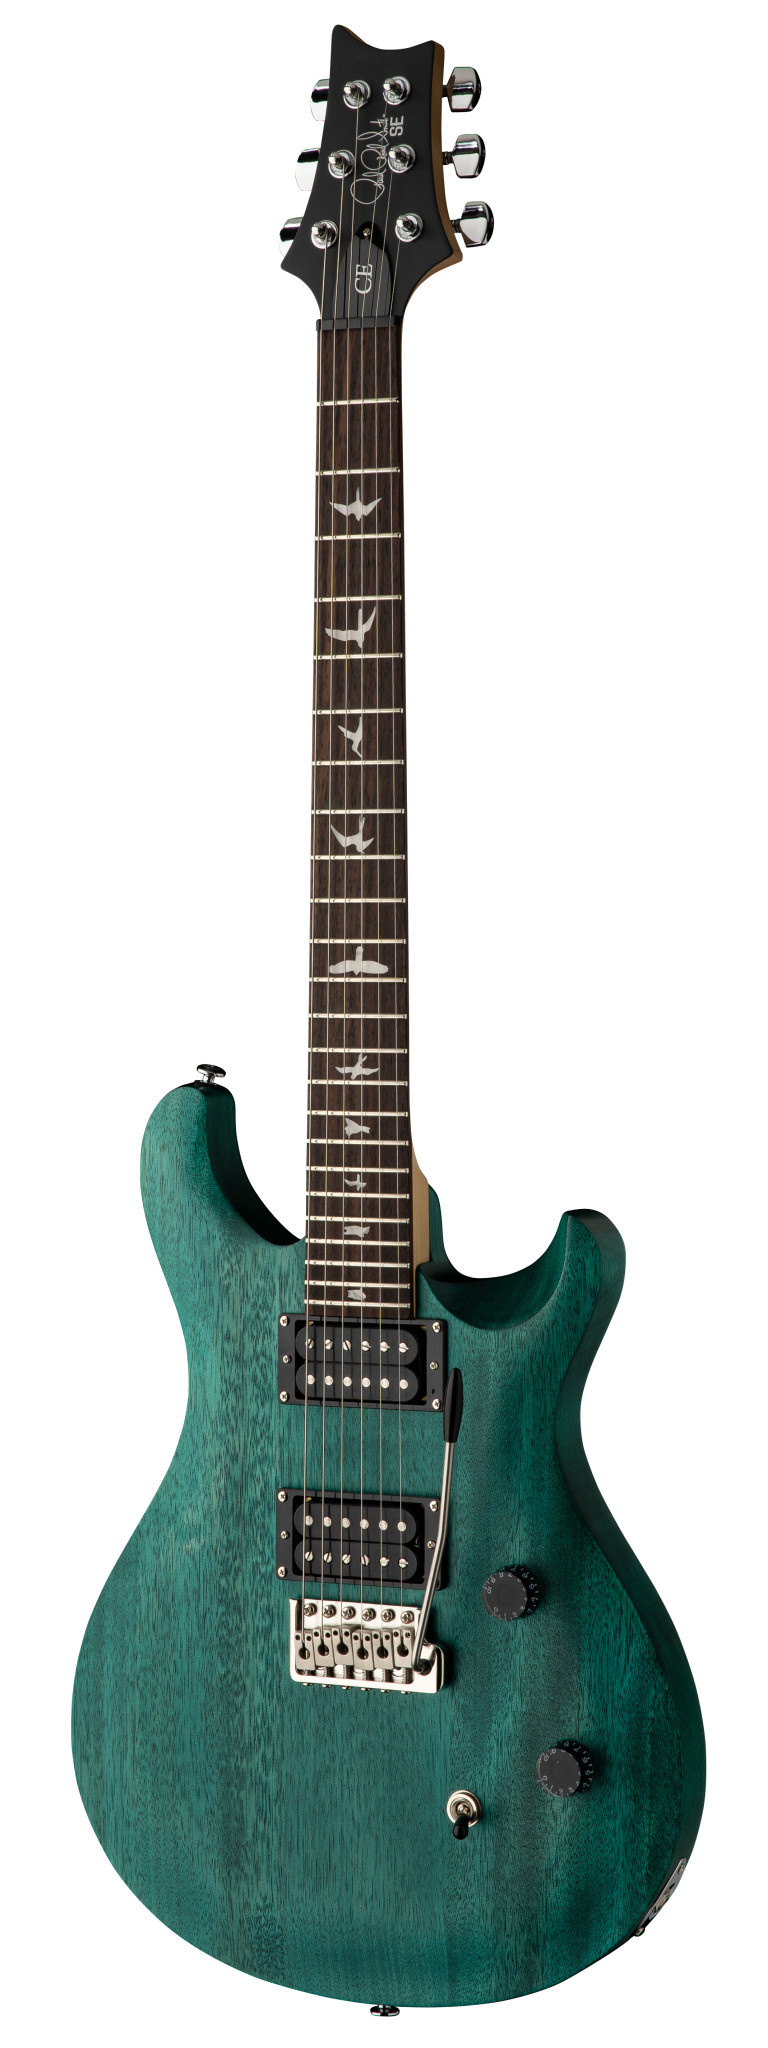 PRS SE CE24 Standard Satin in Turquoise - B's Music Shop